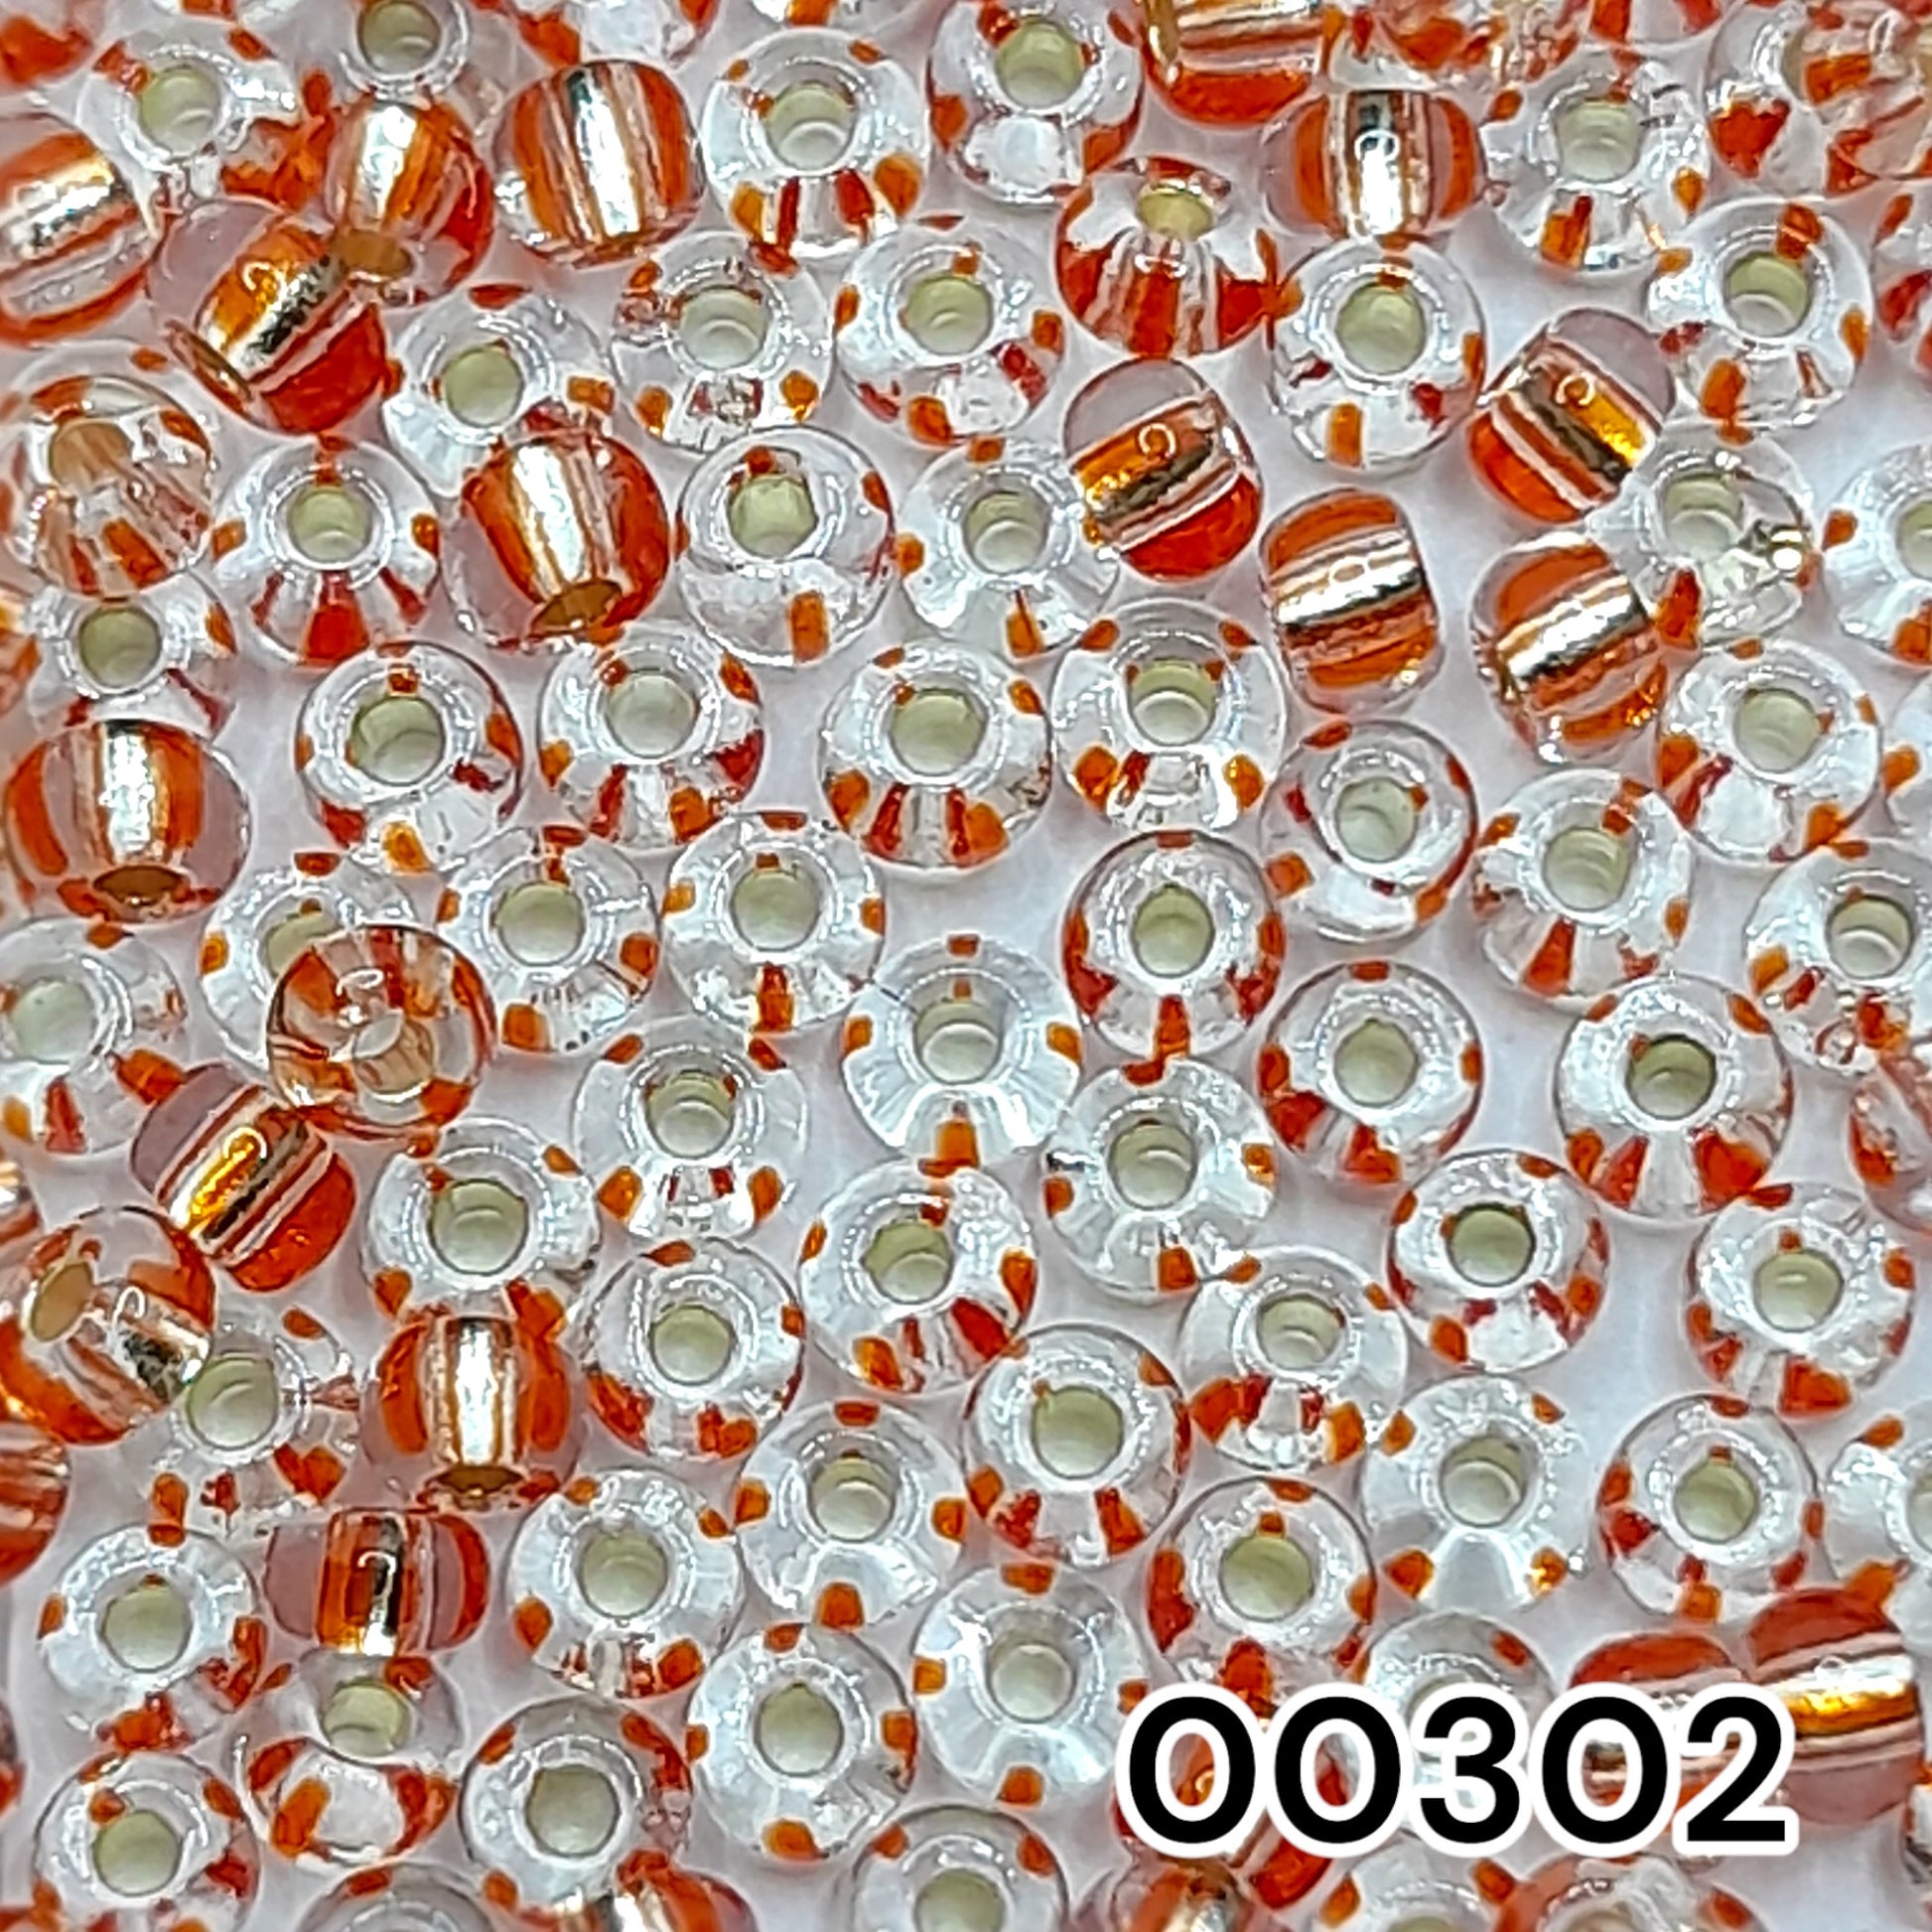 00302 Czech Seed Beads Preciosa Rocailes Crystal Striped Silver Lined - VadymShop